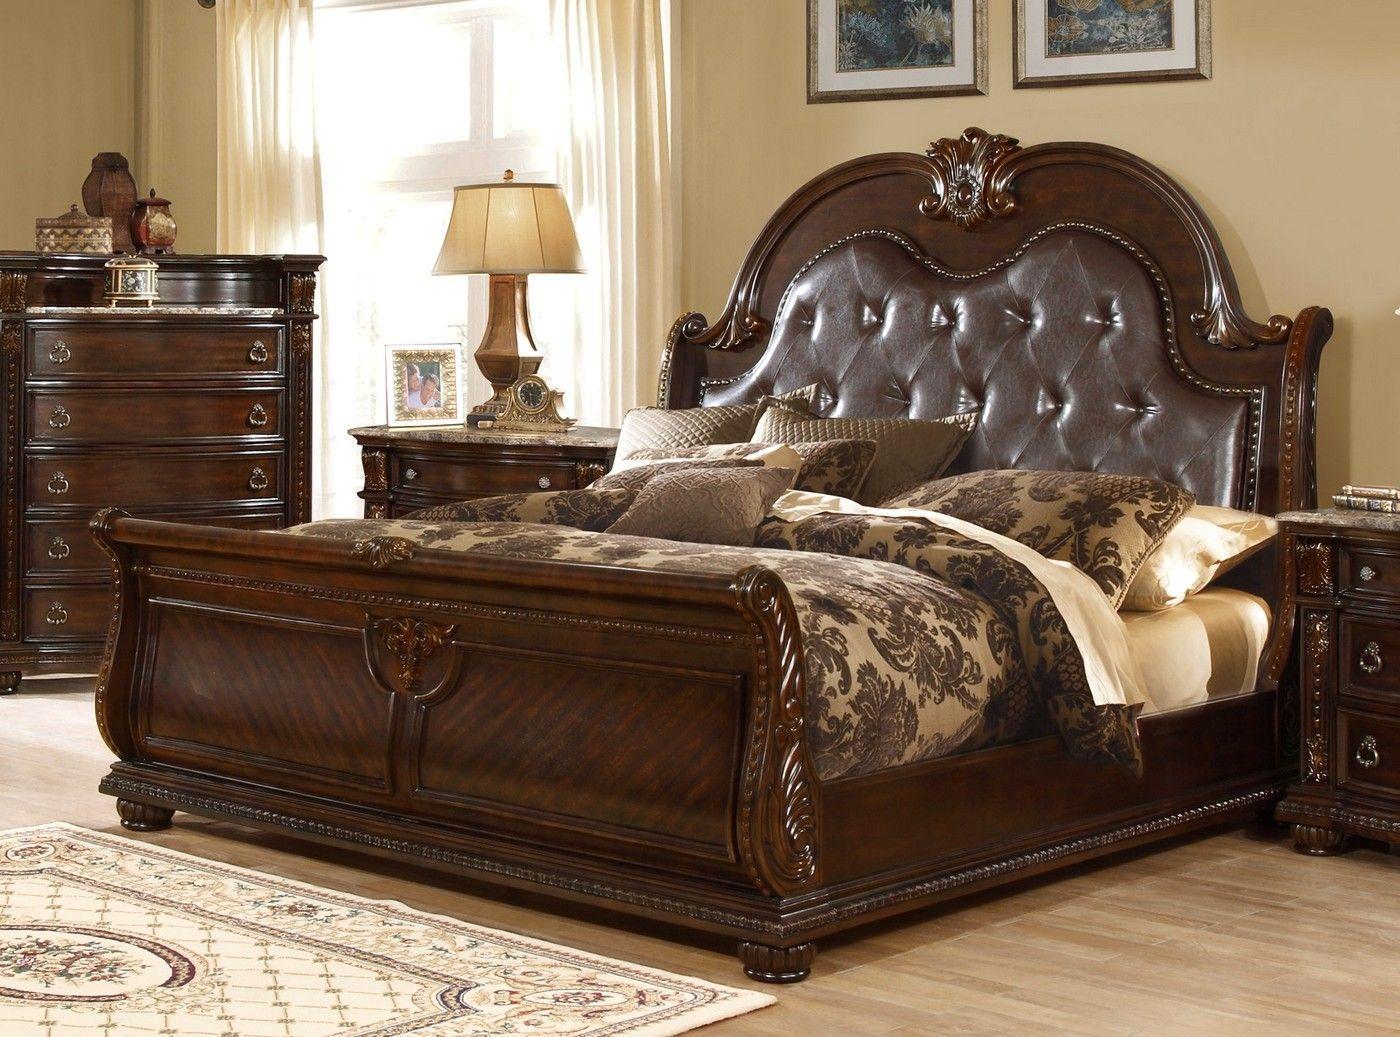 Classic, Traditional Sleigh Bed B9505 B9505-CK in Dark Cherry Bonded Leather